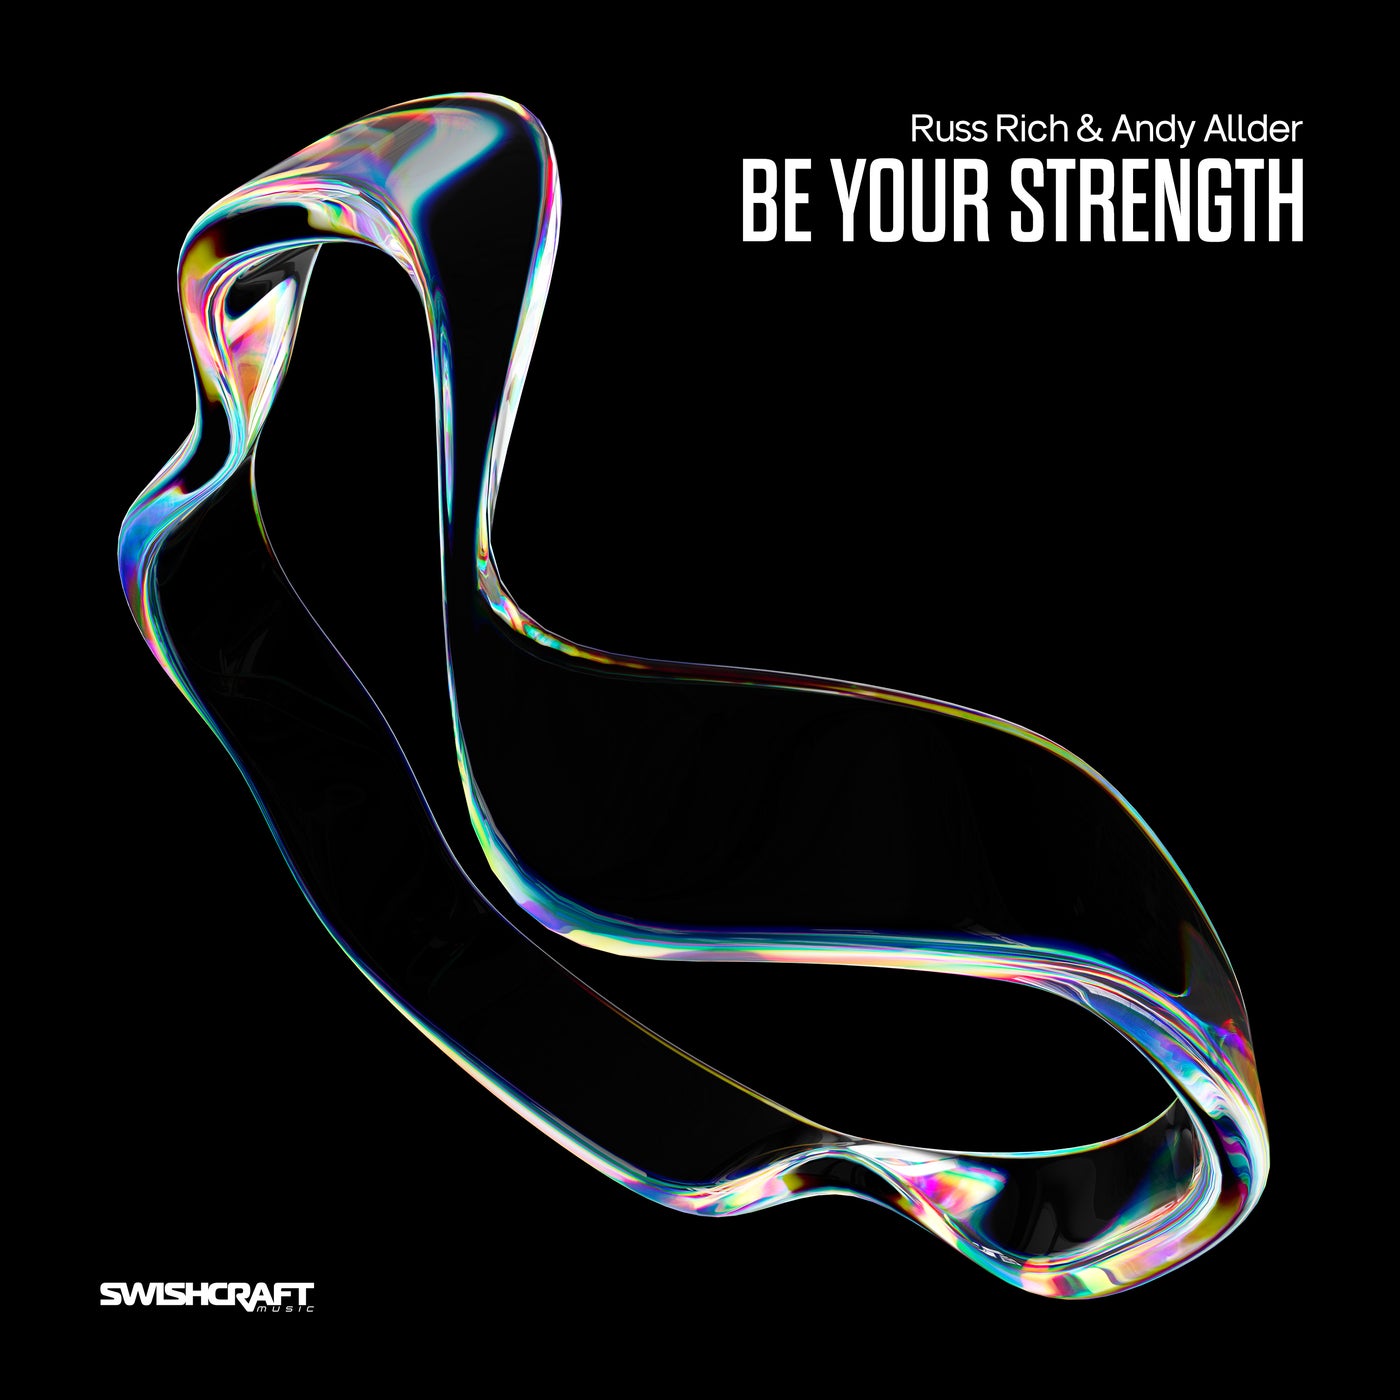 Be Your Strength